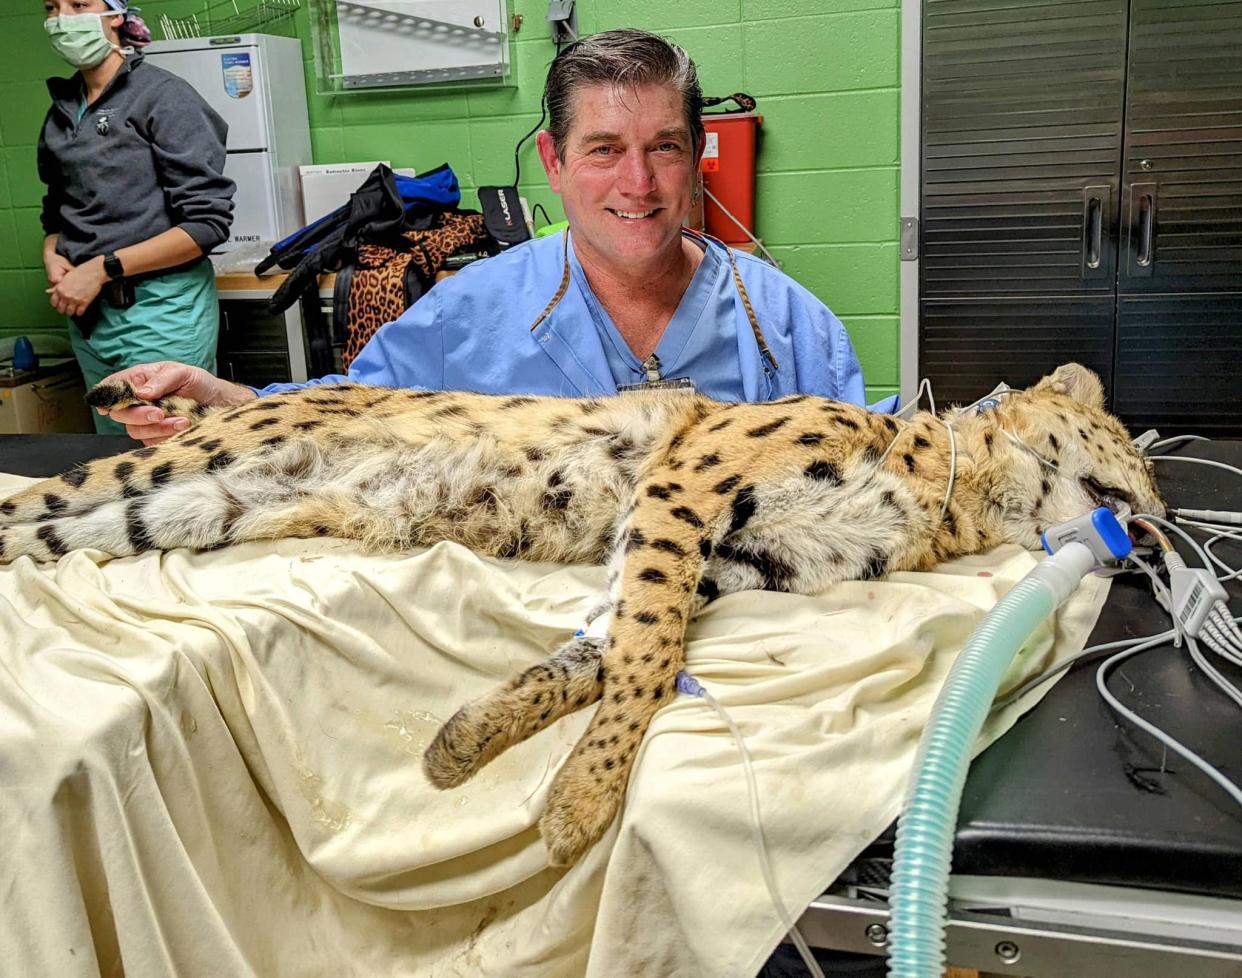 Don Wilson, a Shockwave Lithotripsy Specialist at Cox Branson, helped a big cat in distress at Little Rock Zoo.